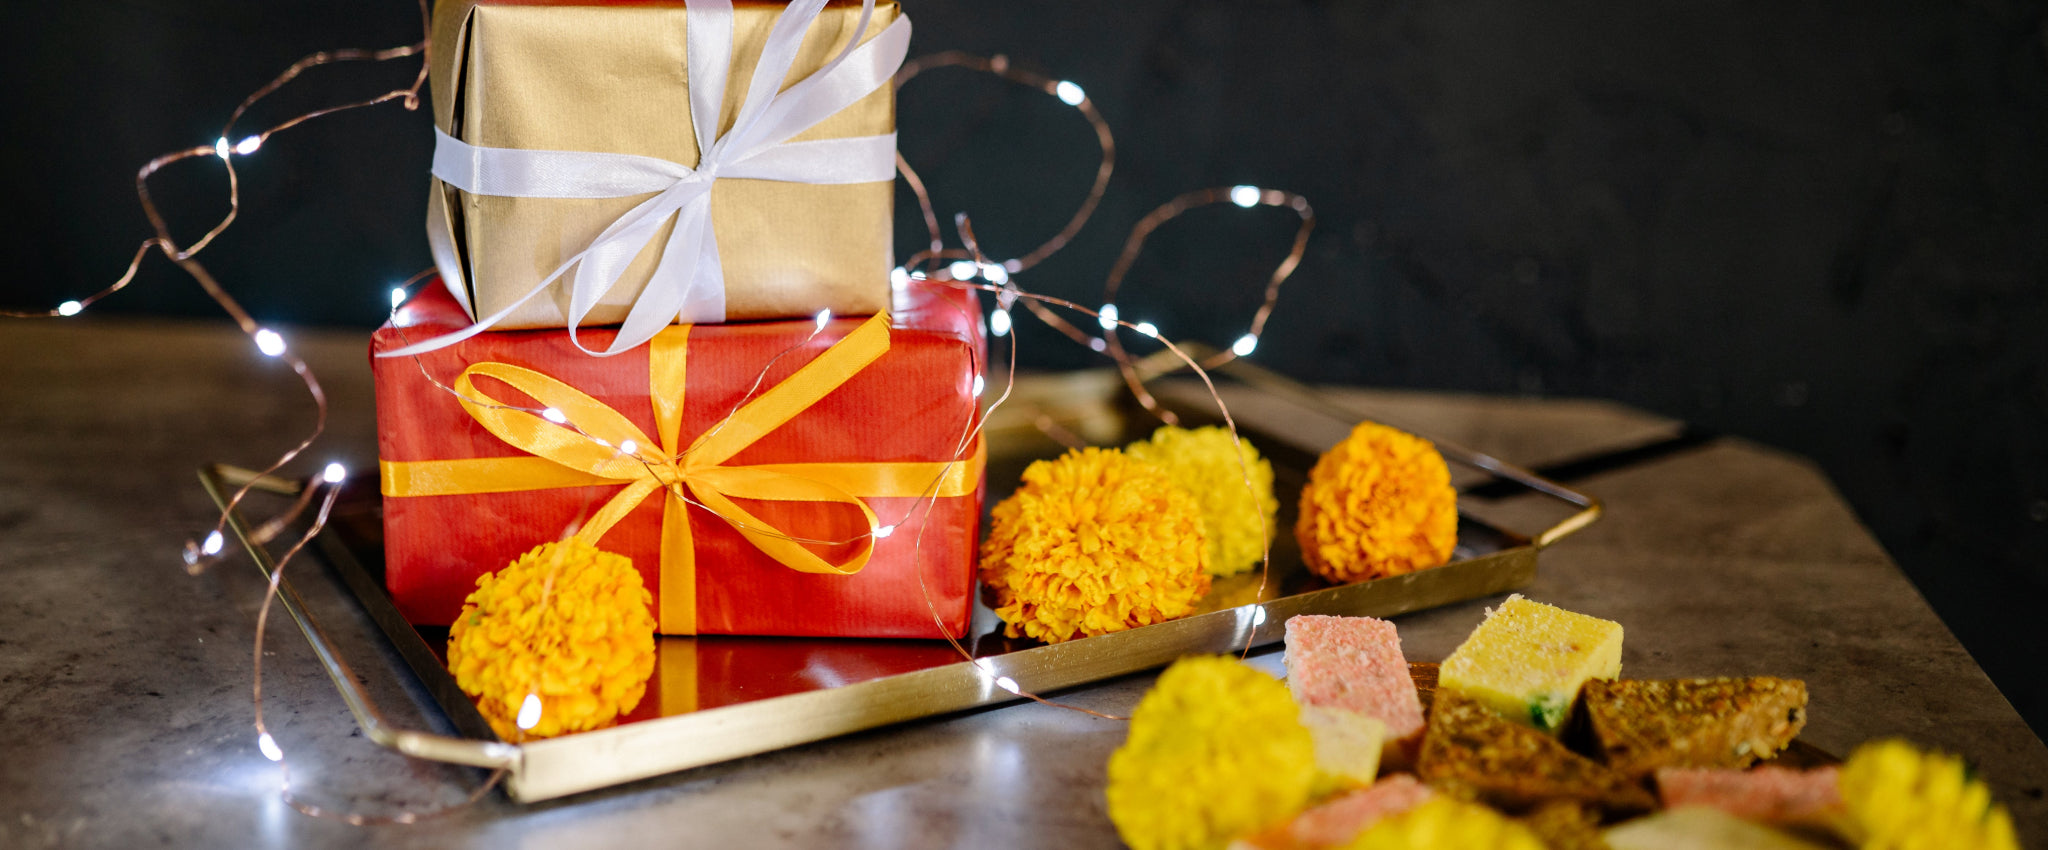 Diwali Gifting guide: 10 Best Diwali Gifts for your spouse | Tech News